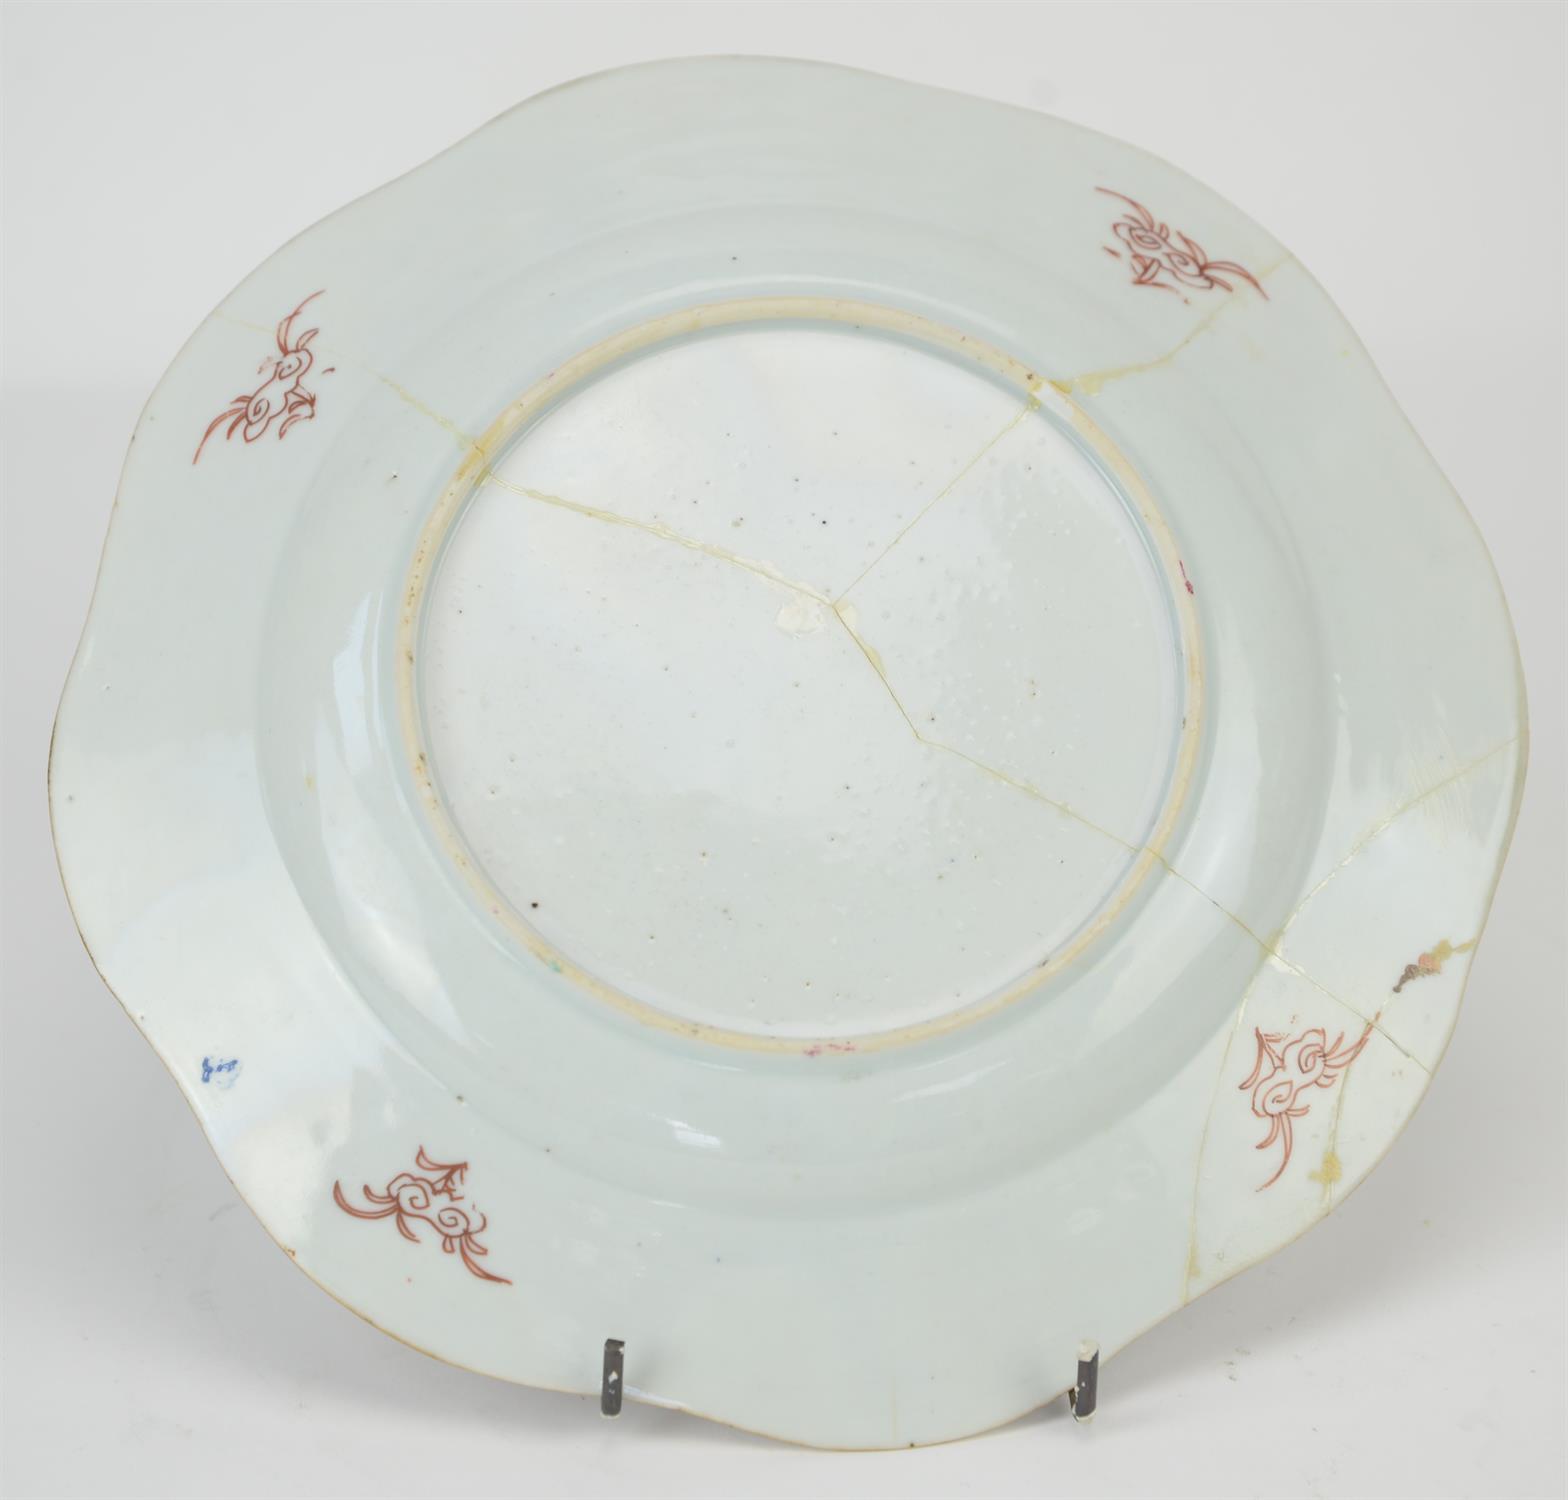 Eight famille rose dishes; each one decorated with floral designs and about 22.5 cm diameter - Image 8 of 14